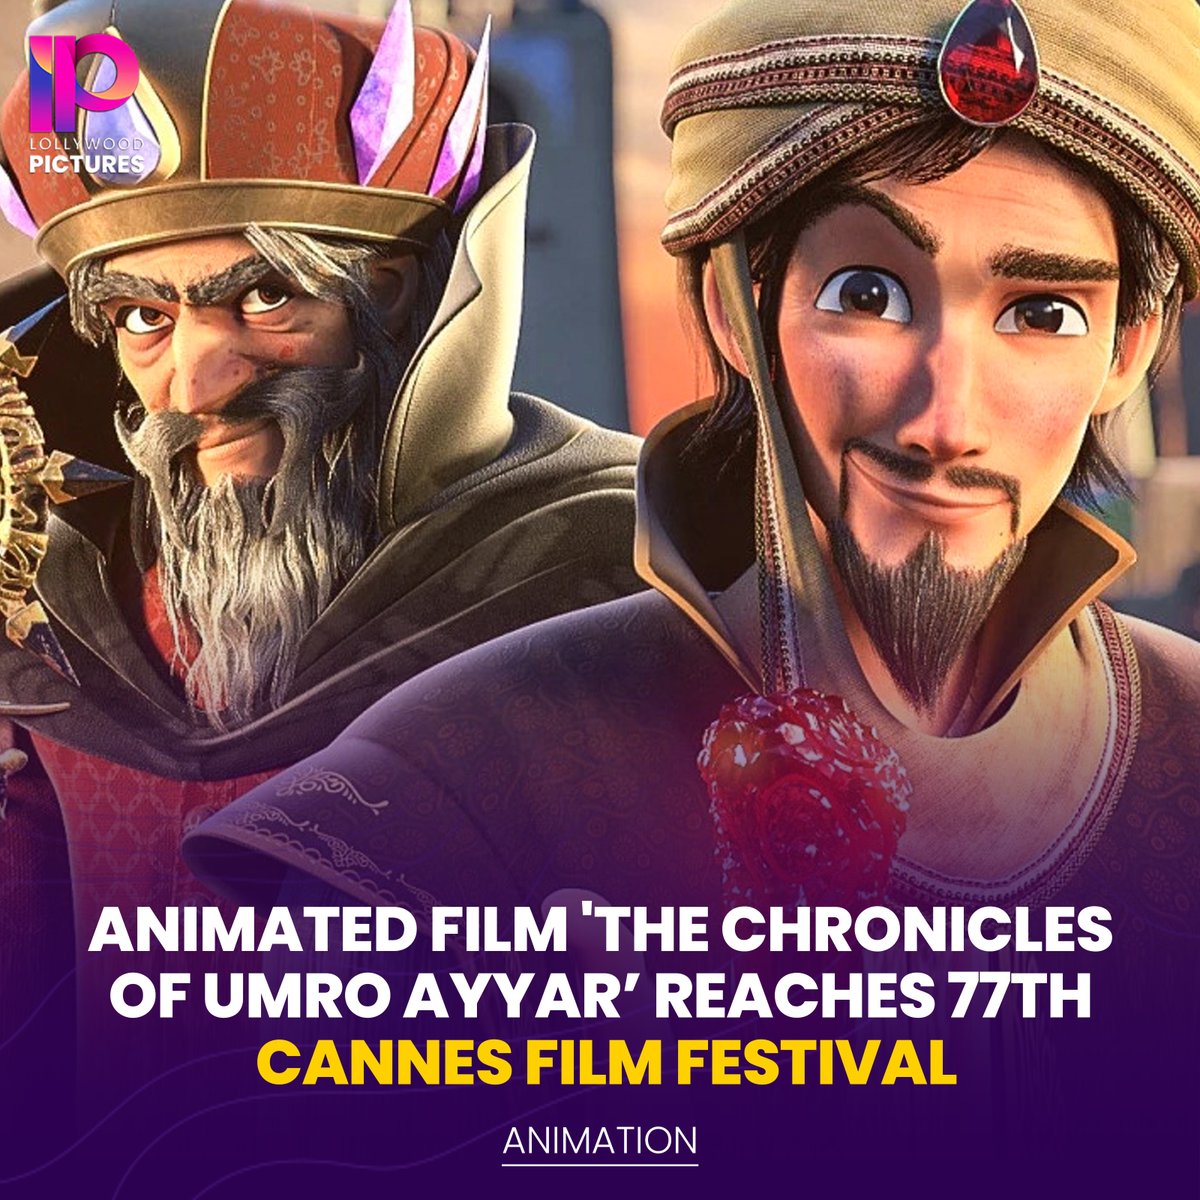 Pakistan's upcoming animated film 'The Chronicles of Umro Ayyar' has reached 77th Cannes Film Festival and will be screened at the event to the global film fraternity. That's indeed a proud moment for Pakistan's Film Industry. 🙌❤ #TheChroniclesOfUmroAyyar #LollywoodPictures